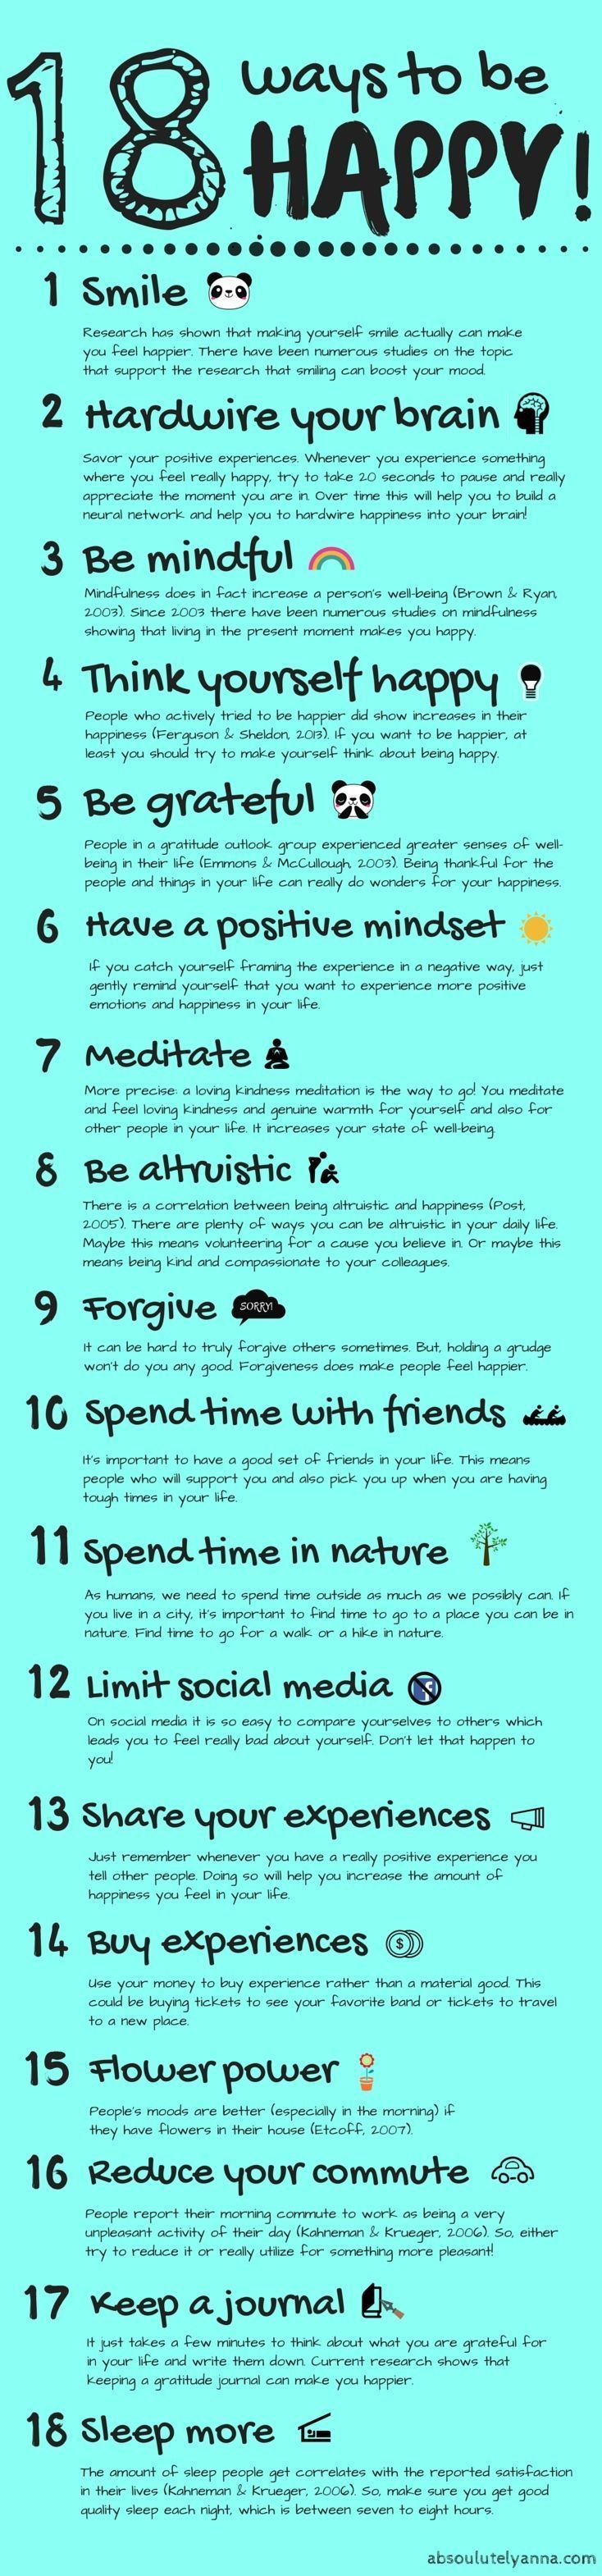 18 simple AND scientifically proven ways to live a little happier! For this post, Id like to give you